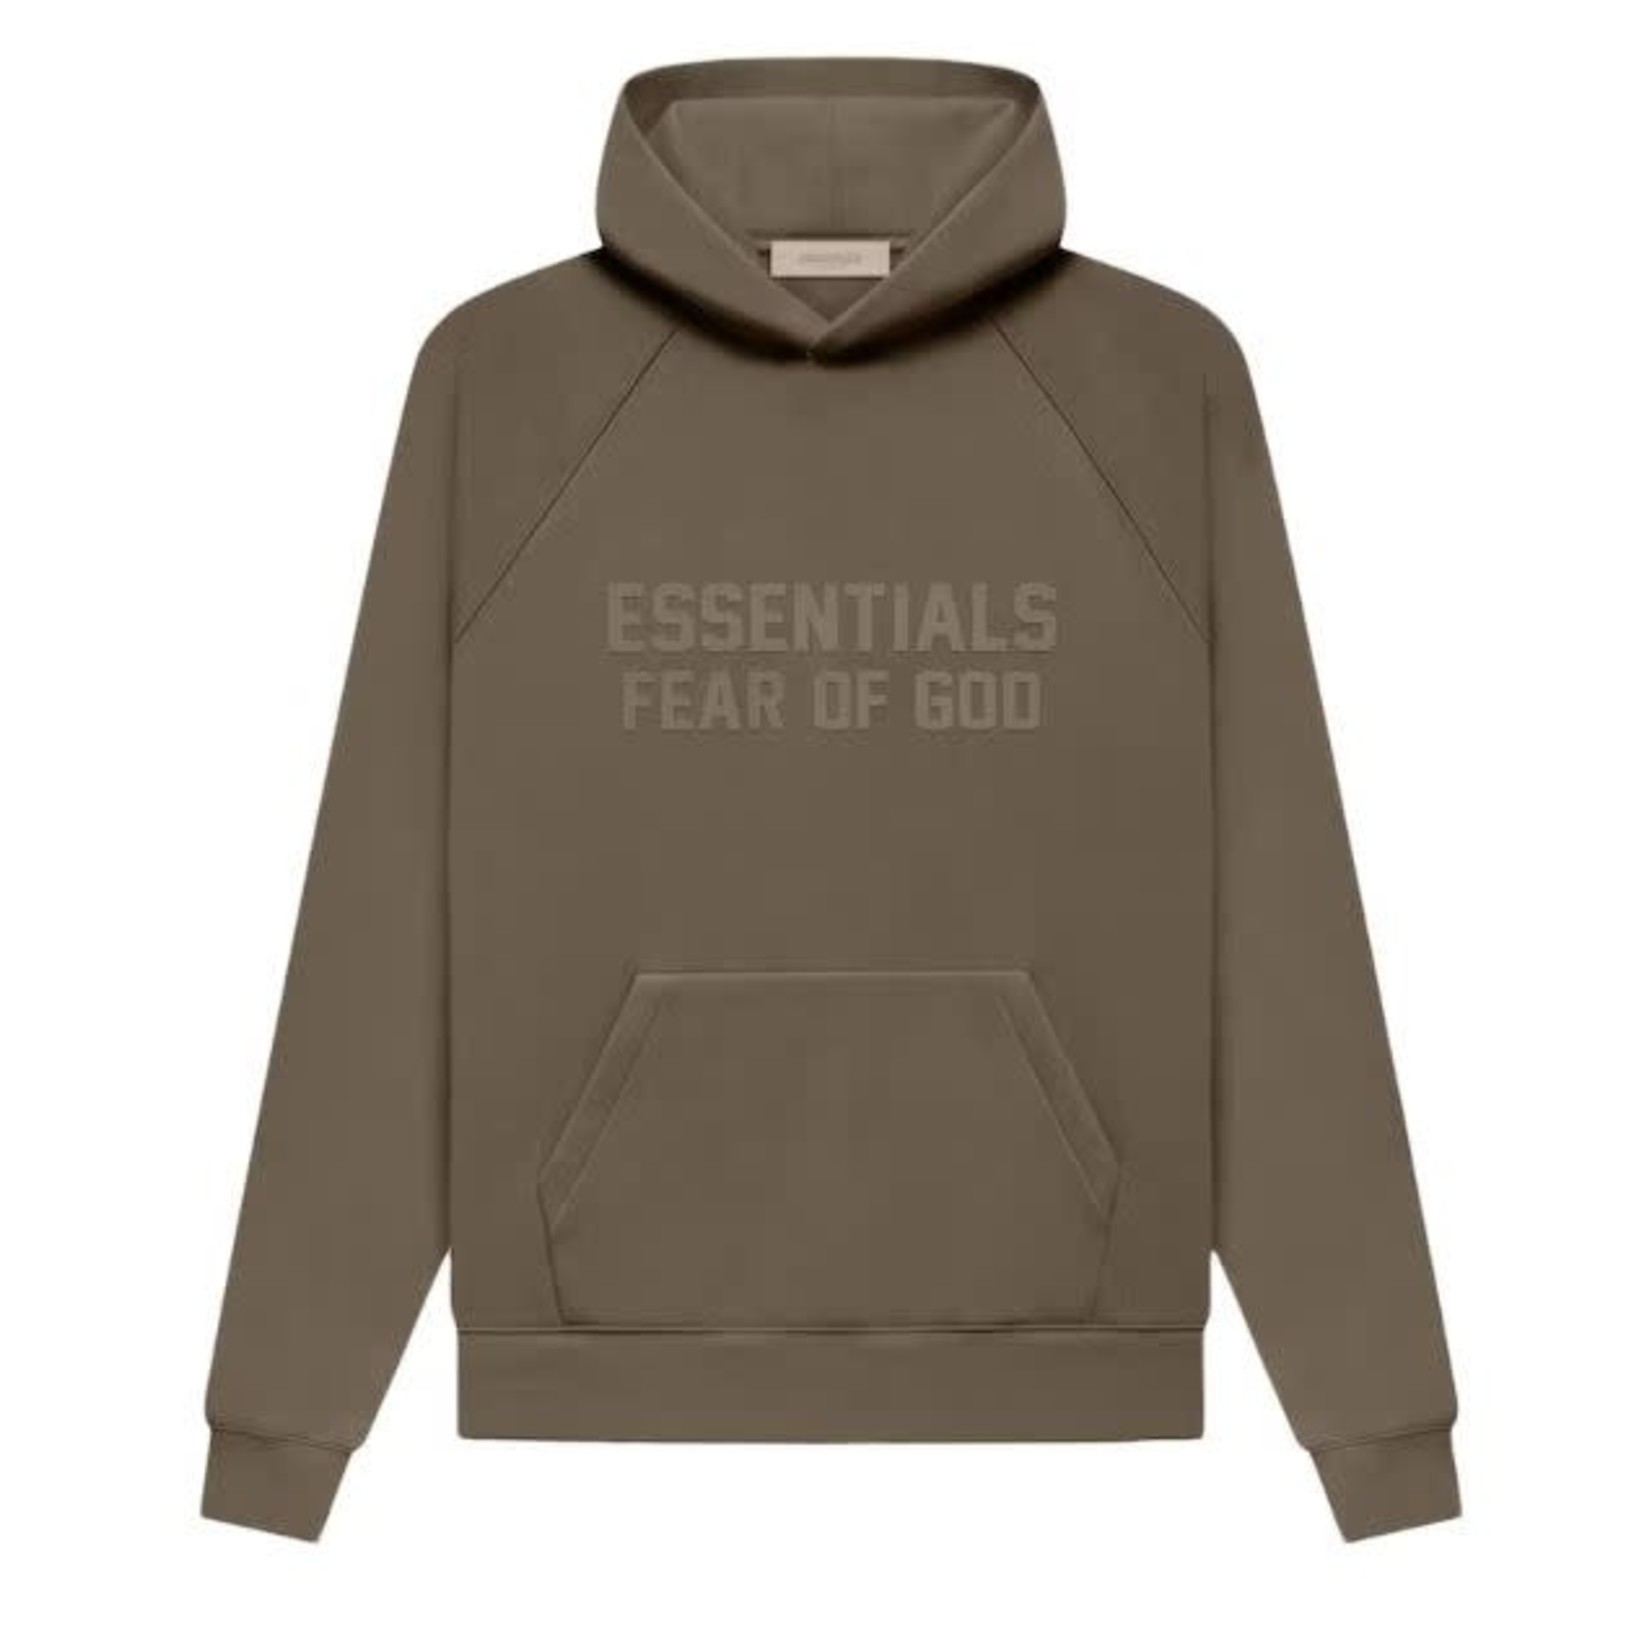 Fear Fear Of God Essentials Hoodie Wood Size XLarge, DS BRAND NEW